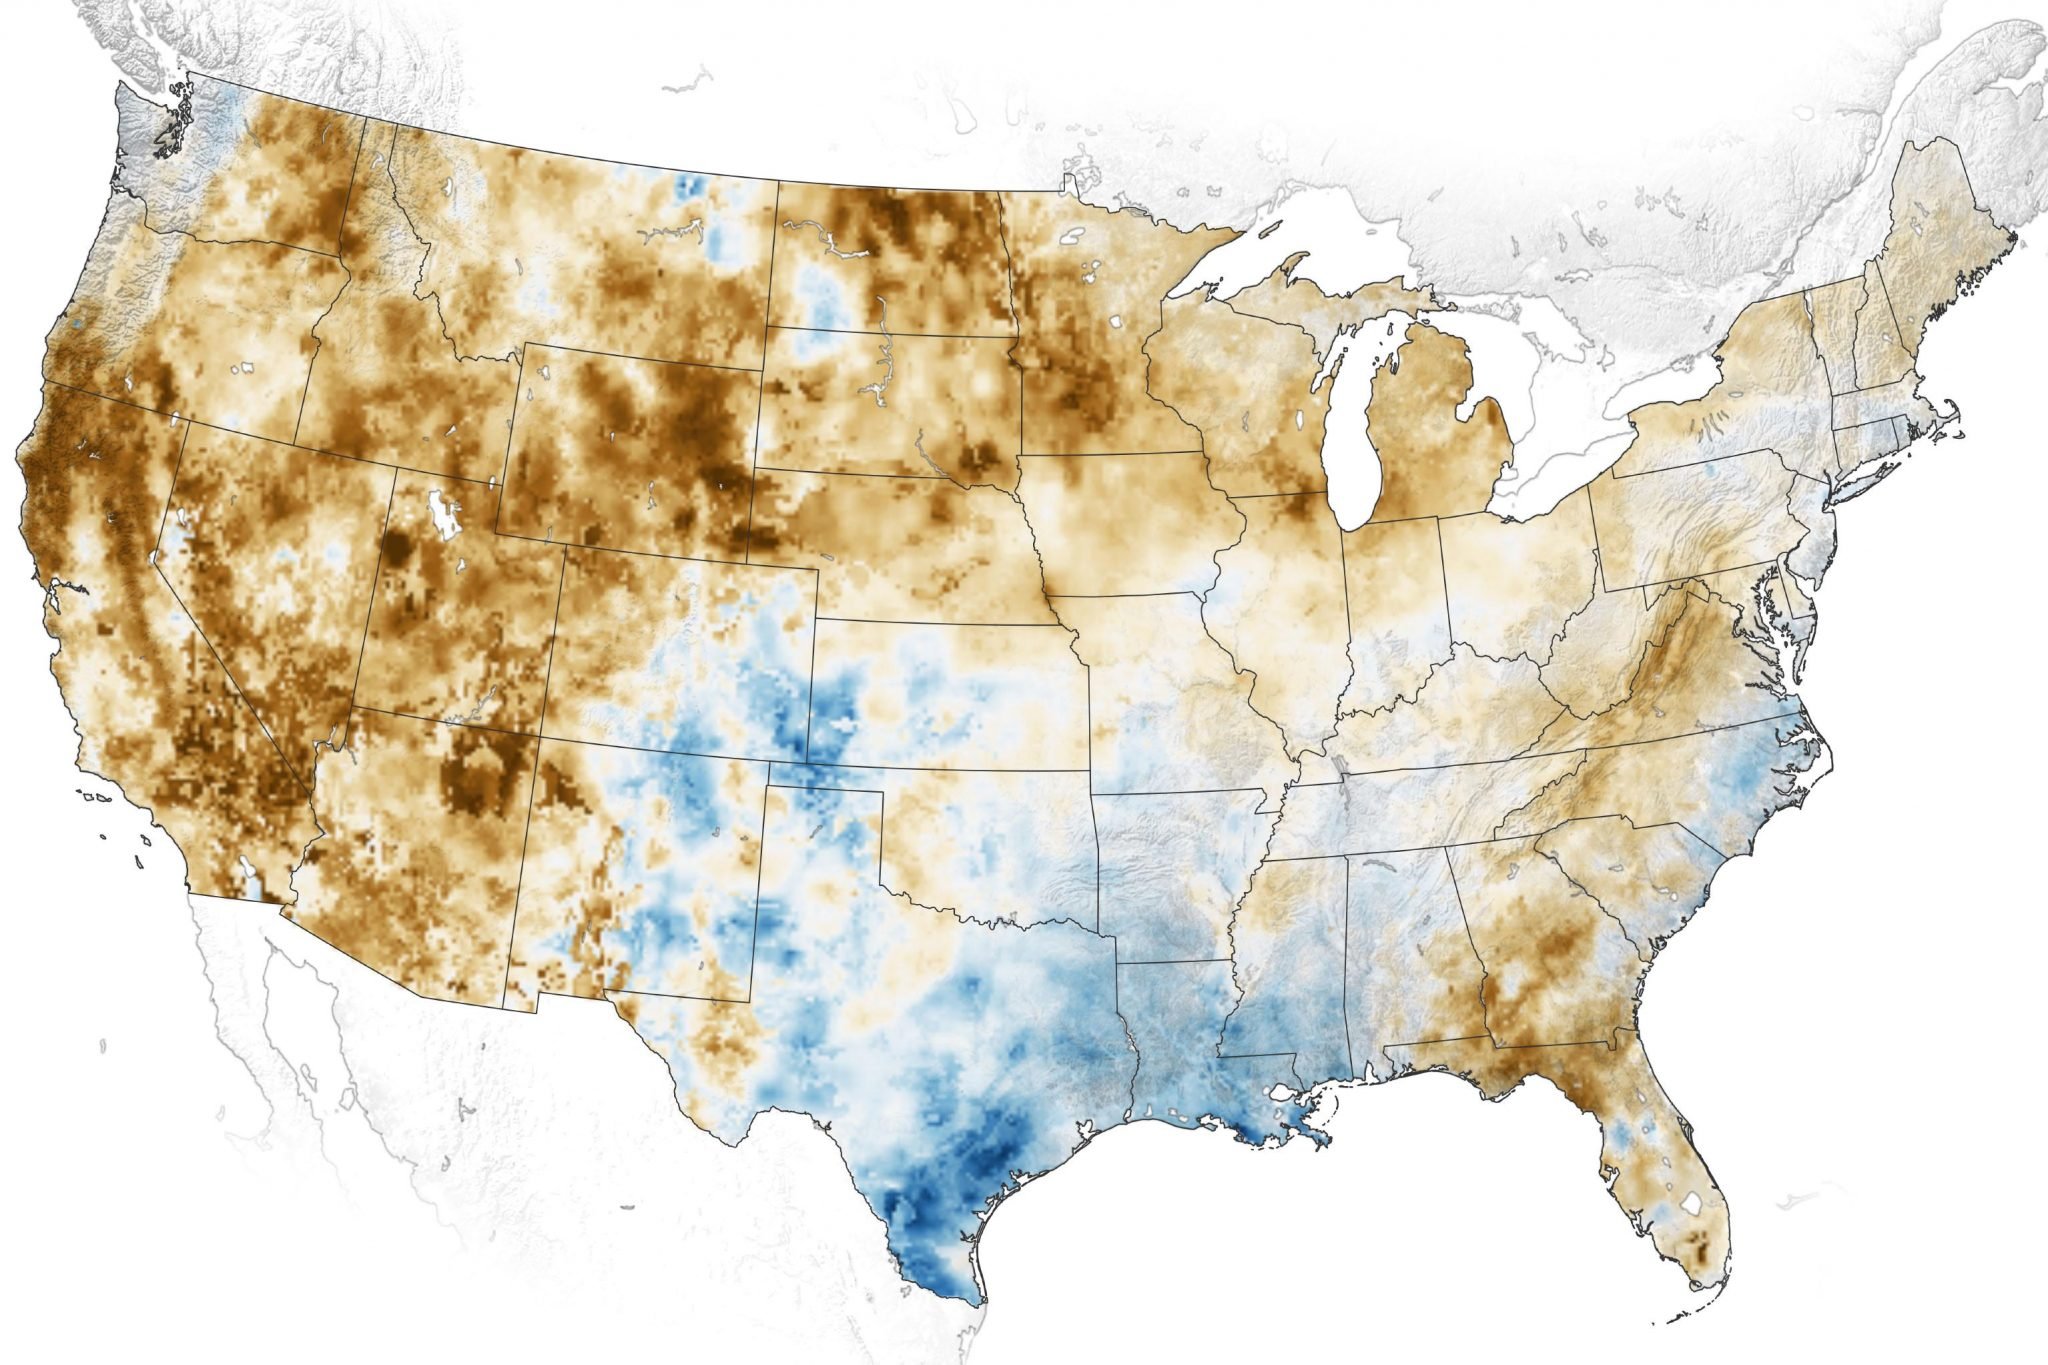 LongTerm Drought Grips the Western U.S. Soils and Plants Are Parched